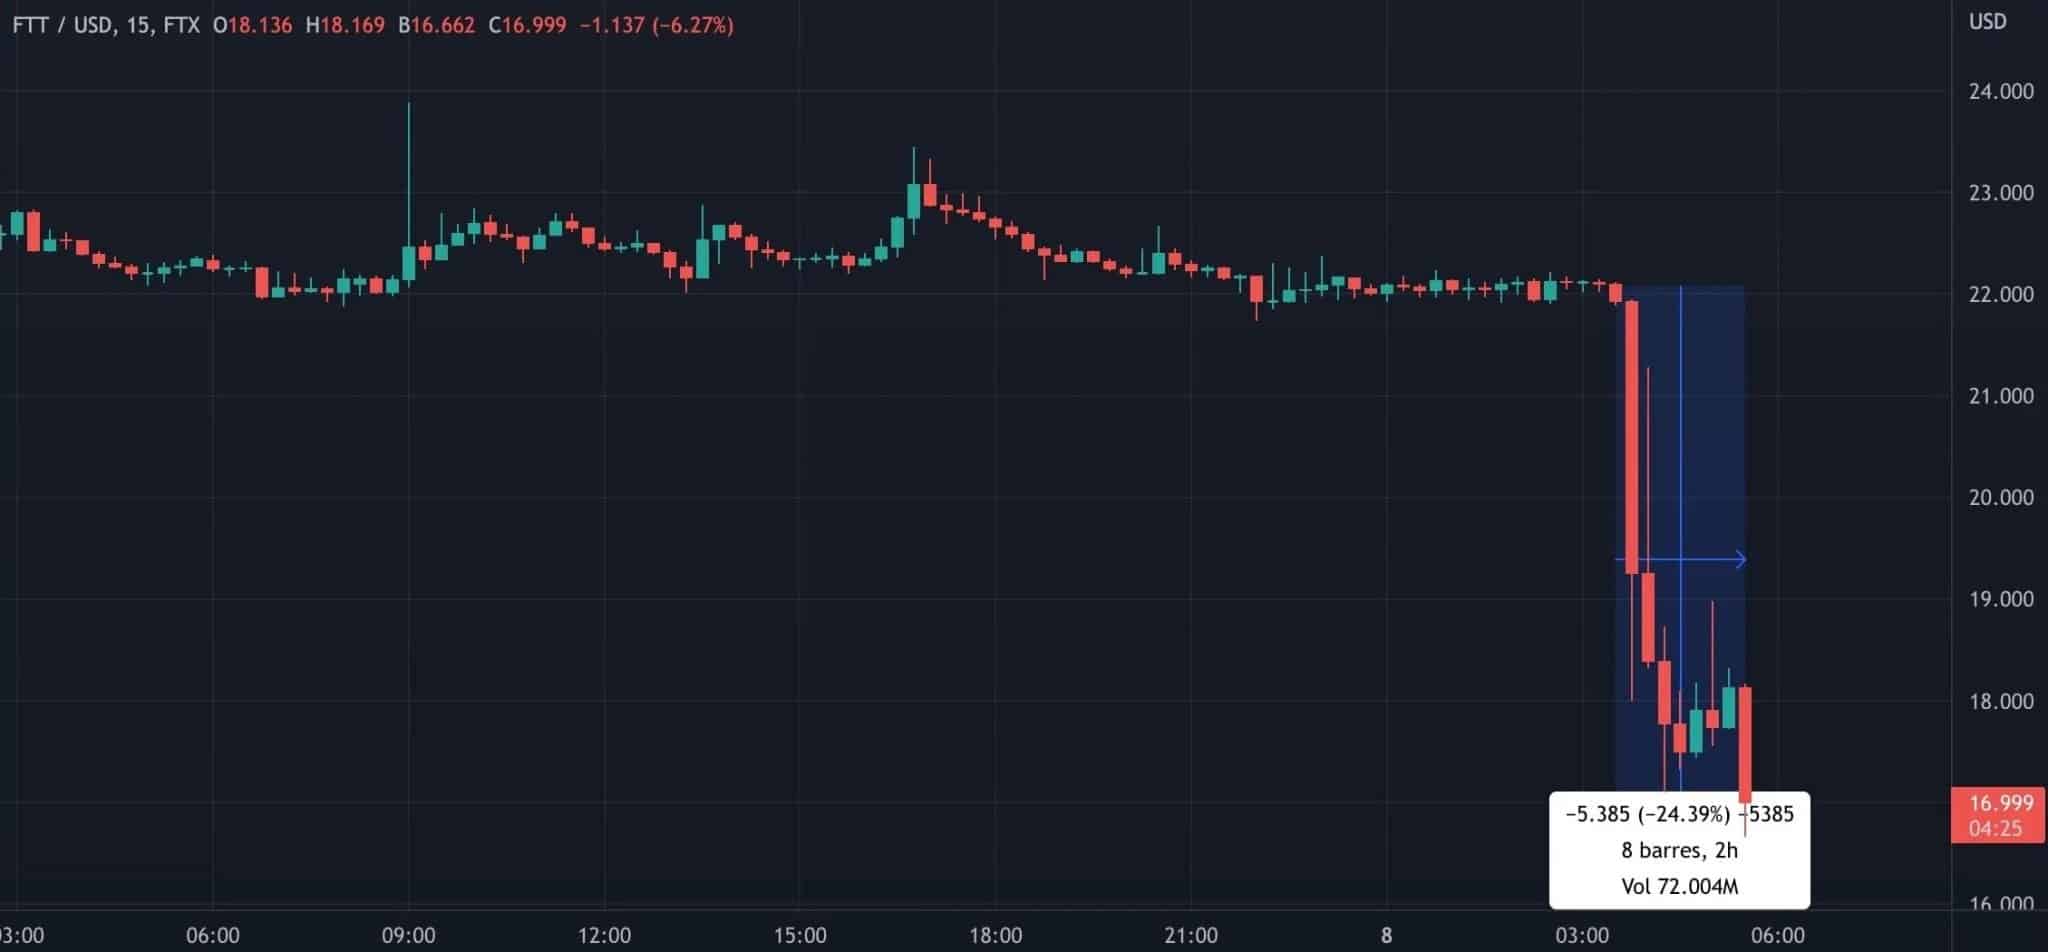 FTT price movement against the USD in 15 minute time scale.